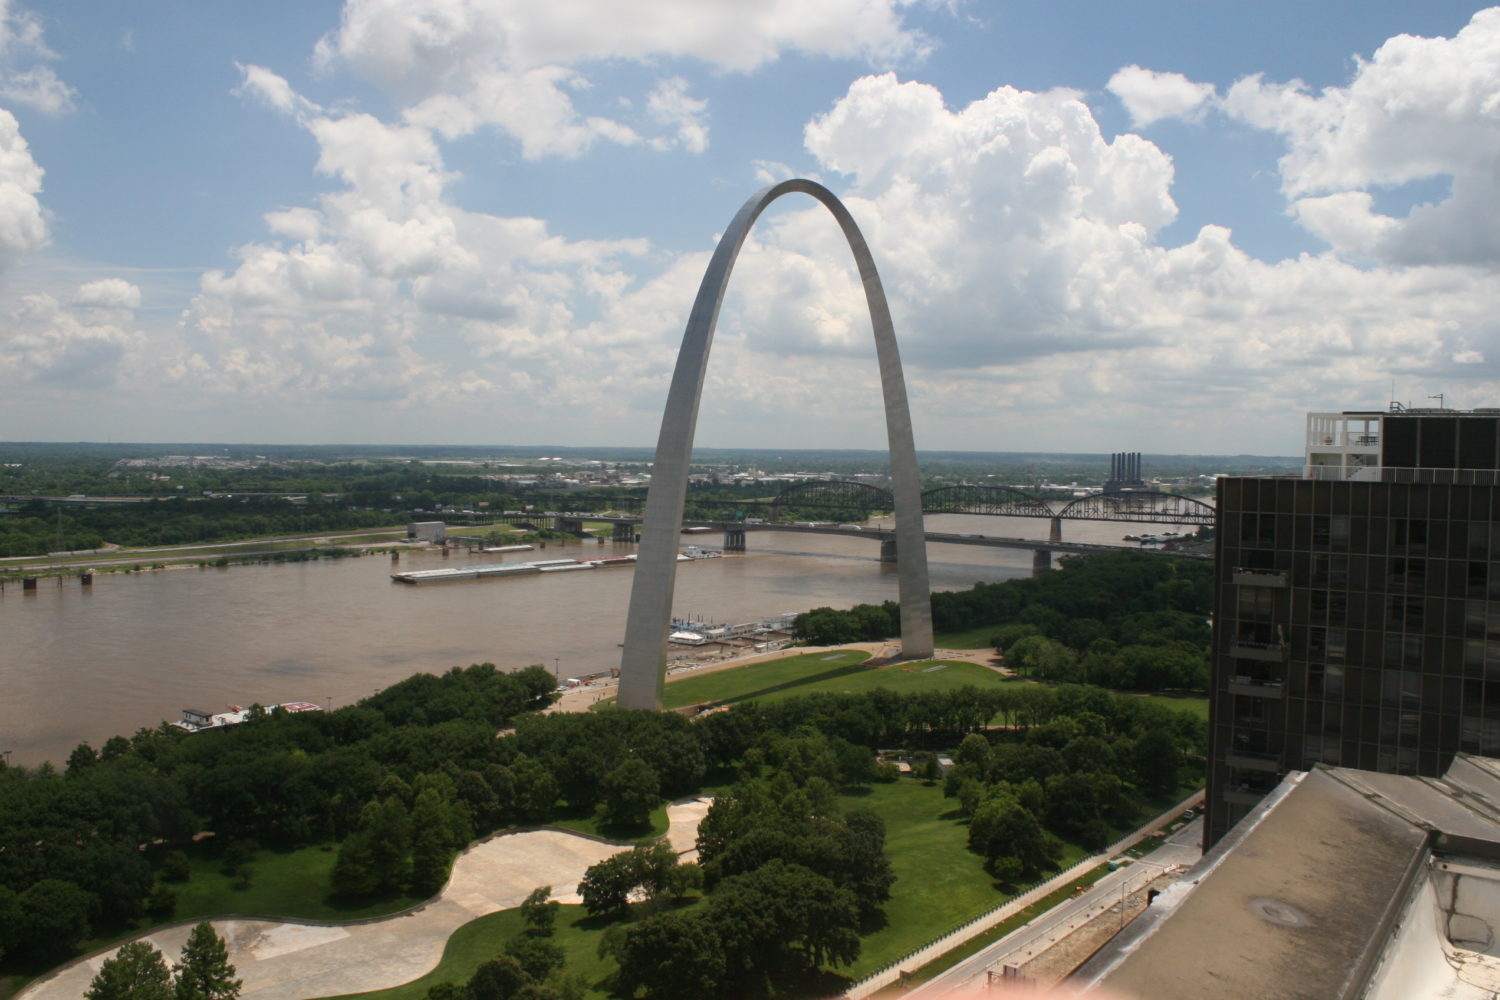 Museum Monday: St. Louis Gateway Arch museum - Stuck at the Airport